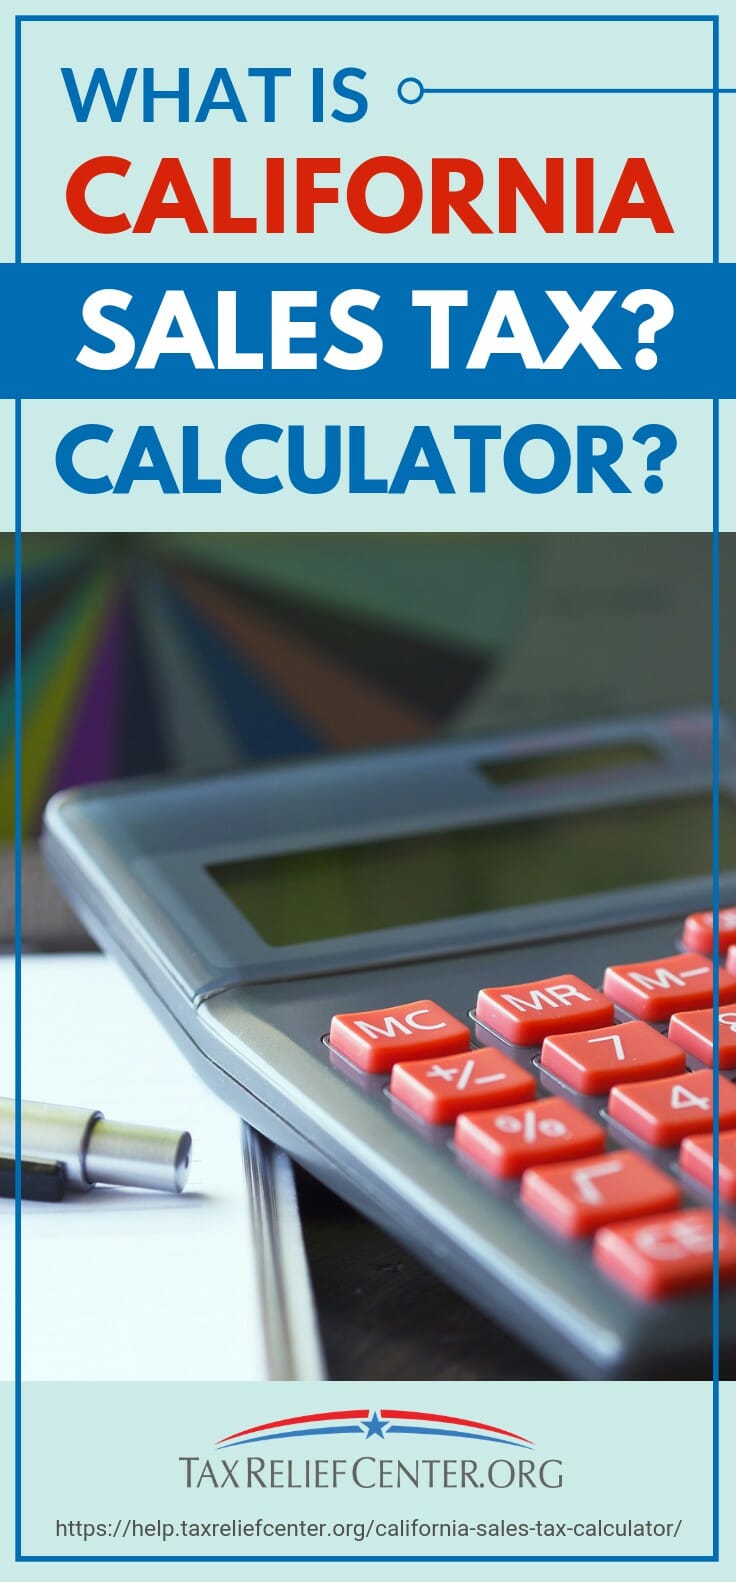 What Is California Sales Tax Calculator? | https://help.taxreliefcenter.org/california-sales-tax-calculator/